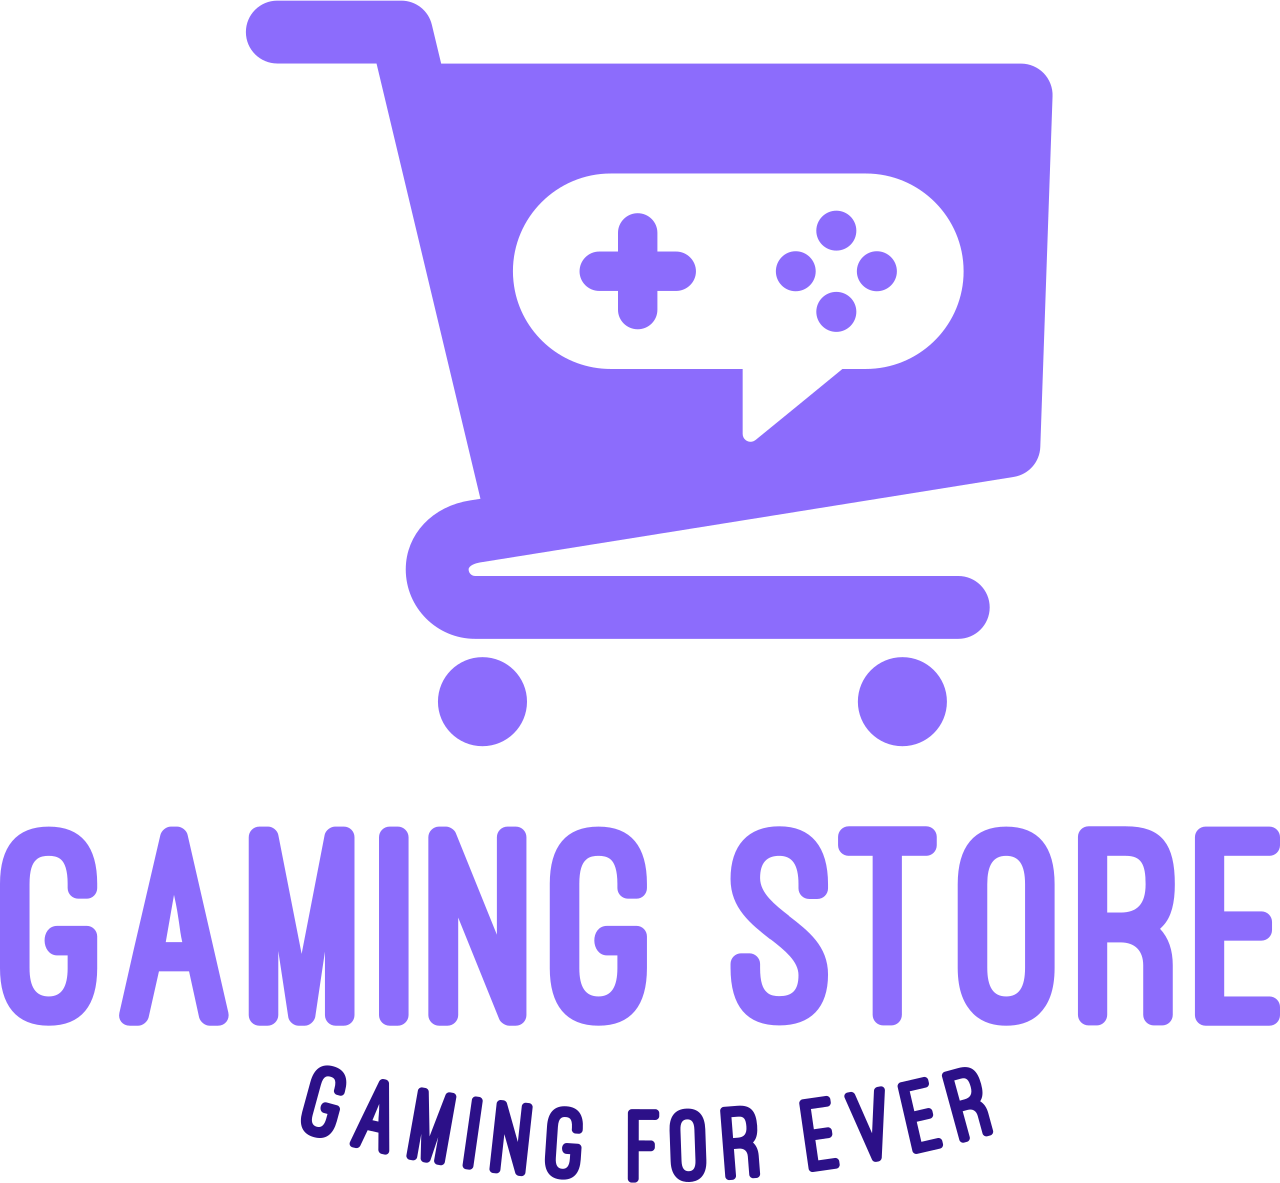 Gaming Store's web page